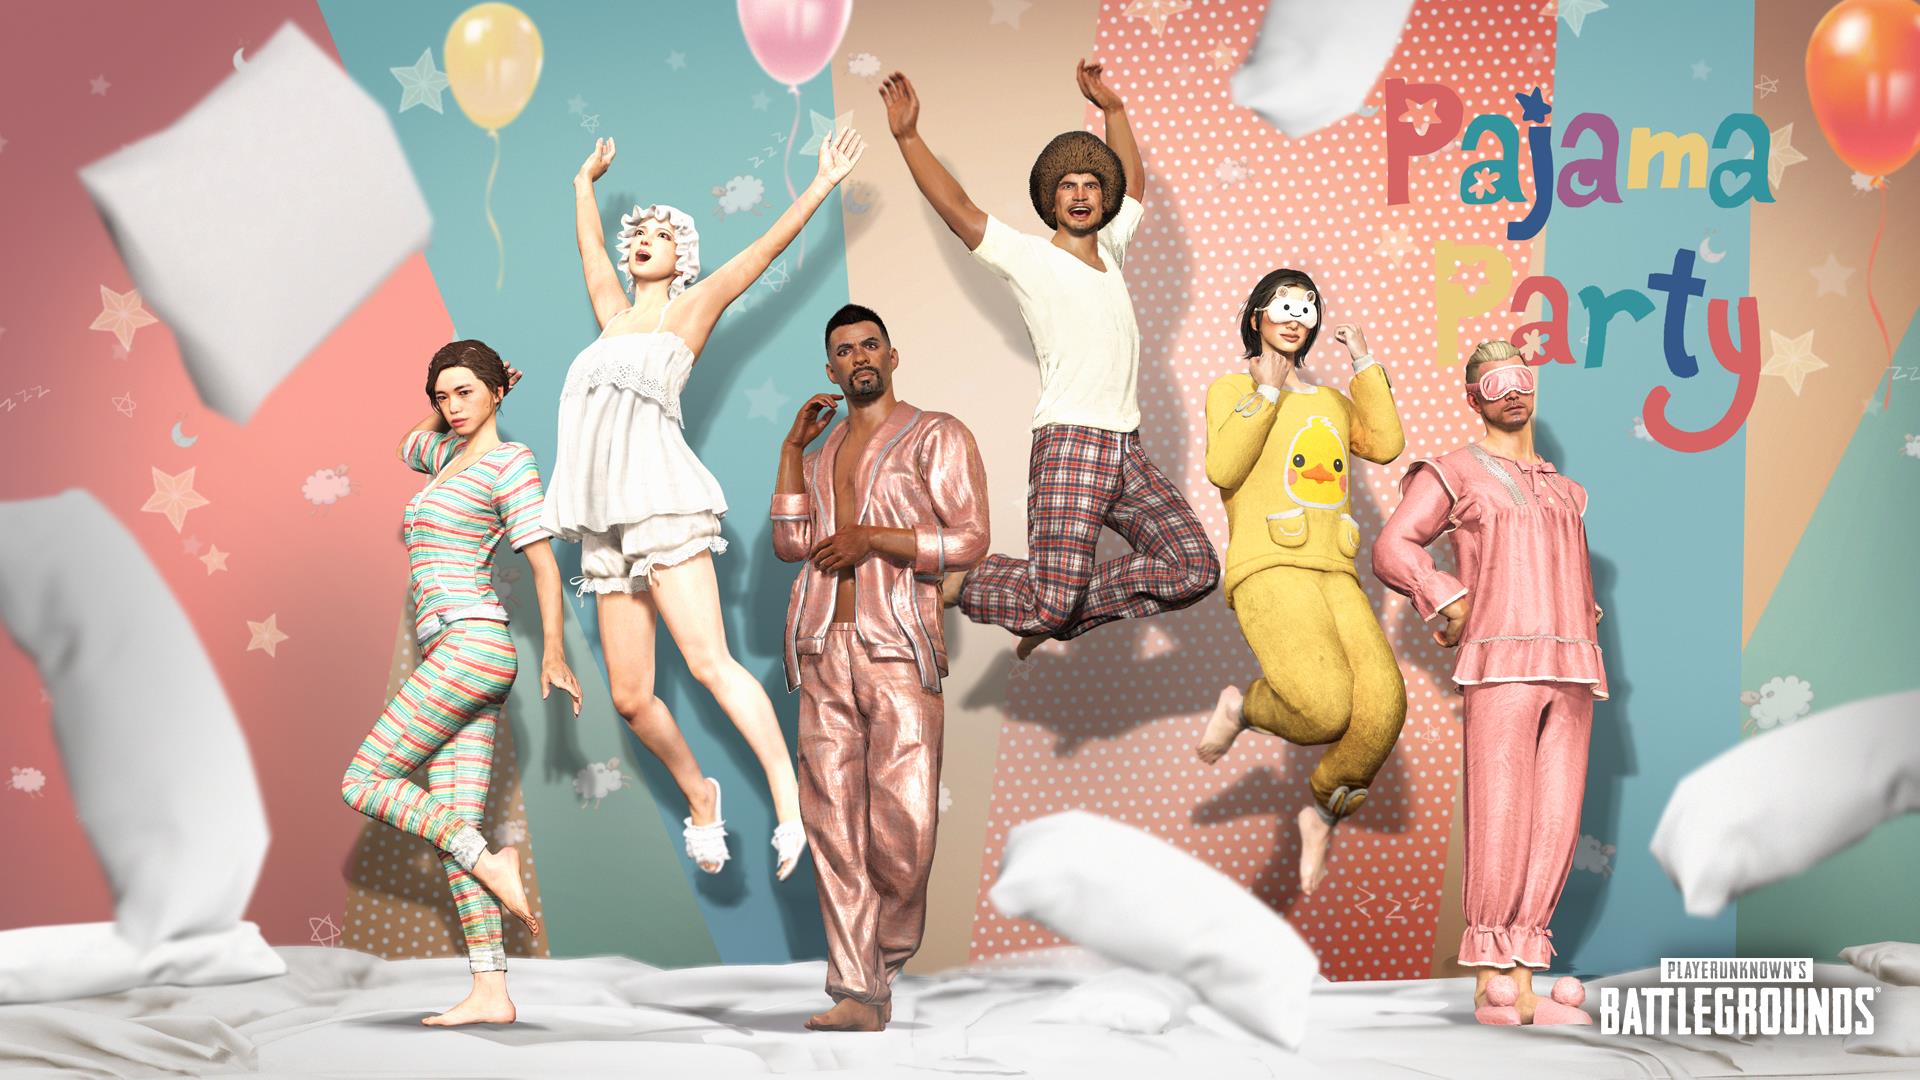 Image for PUBG in 2021: Pajama Parties